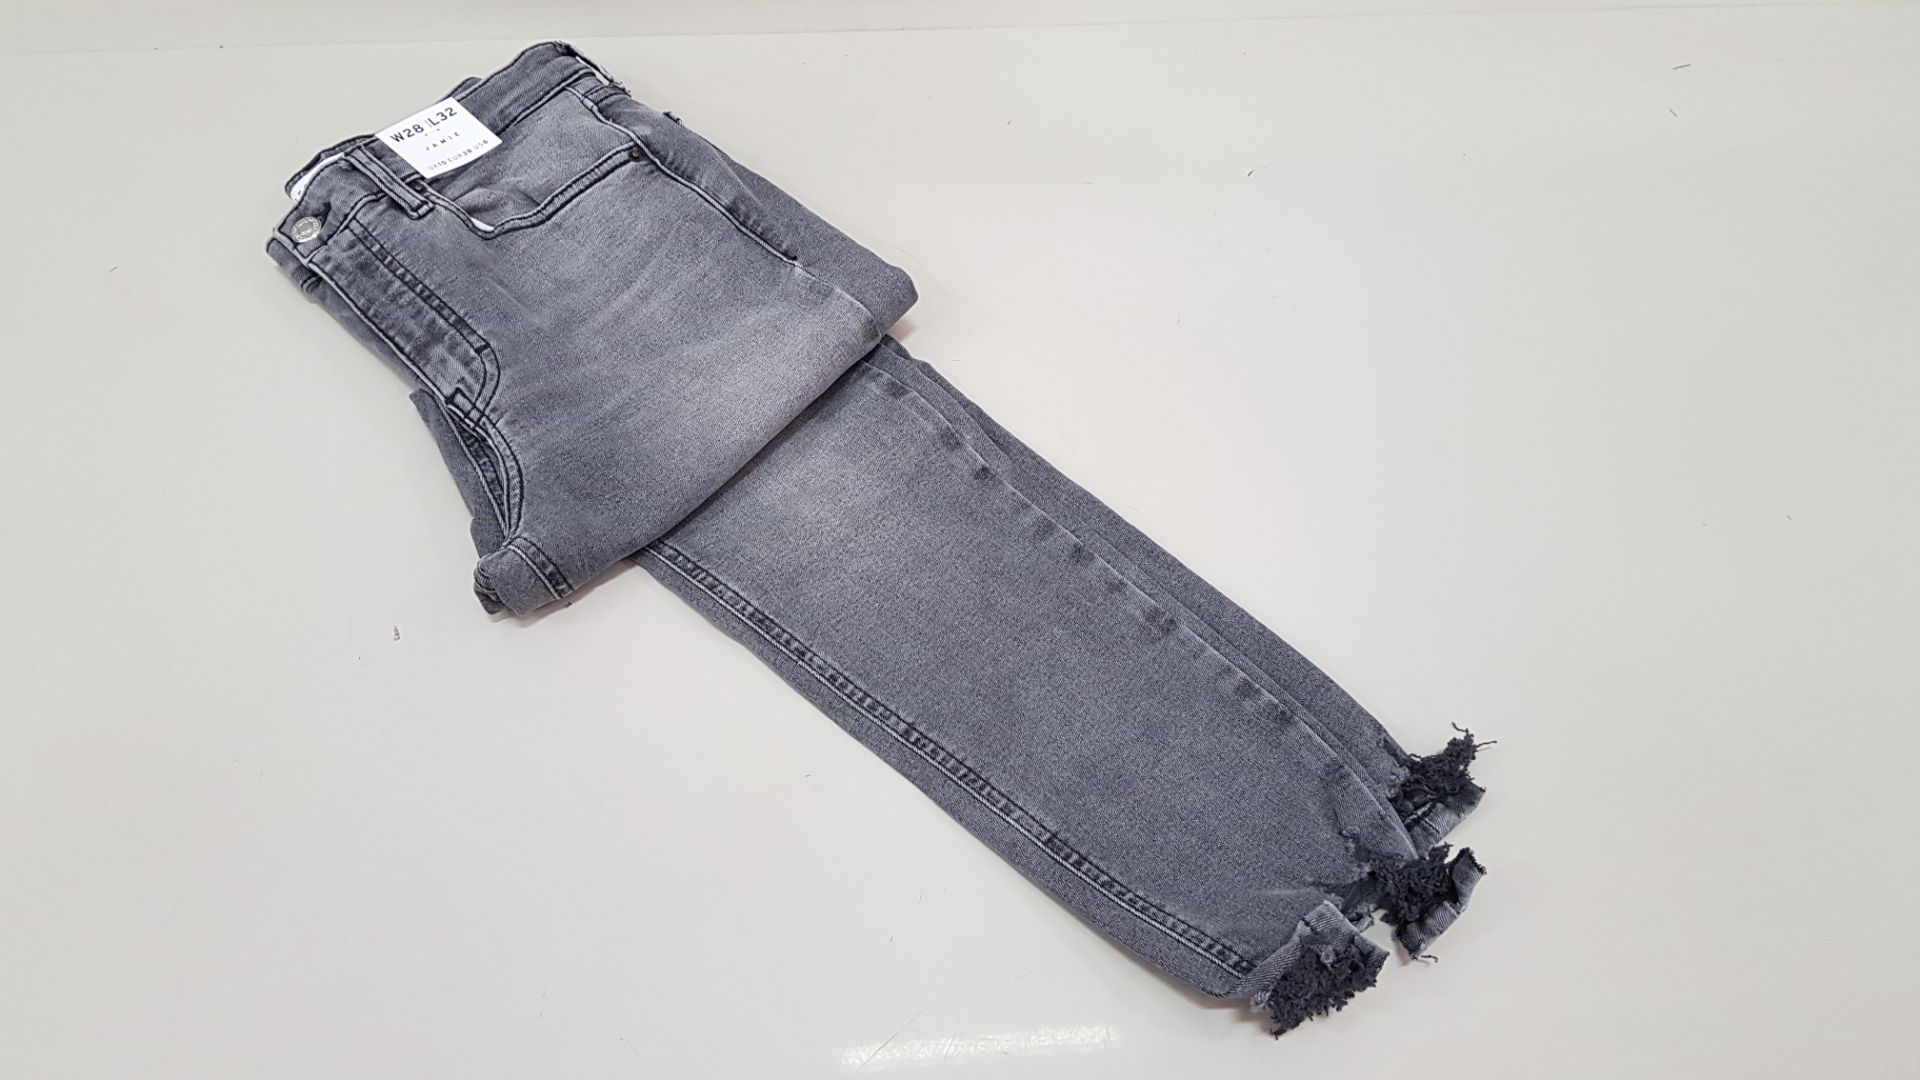 10 X BRAND NEW TOPSHOP JAMIE JEANS UK SIZE 10 RRP £42.00 (TOTAL RRP £420.00)